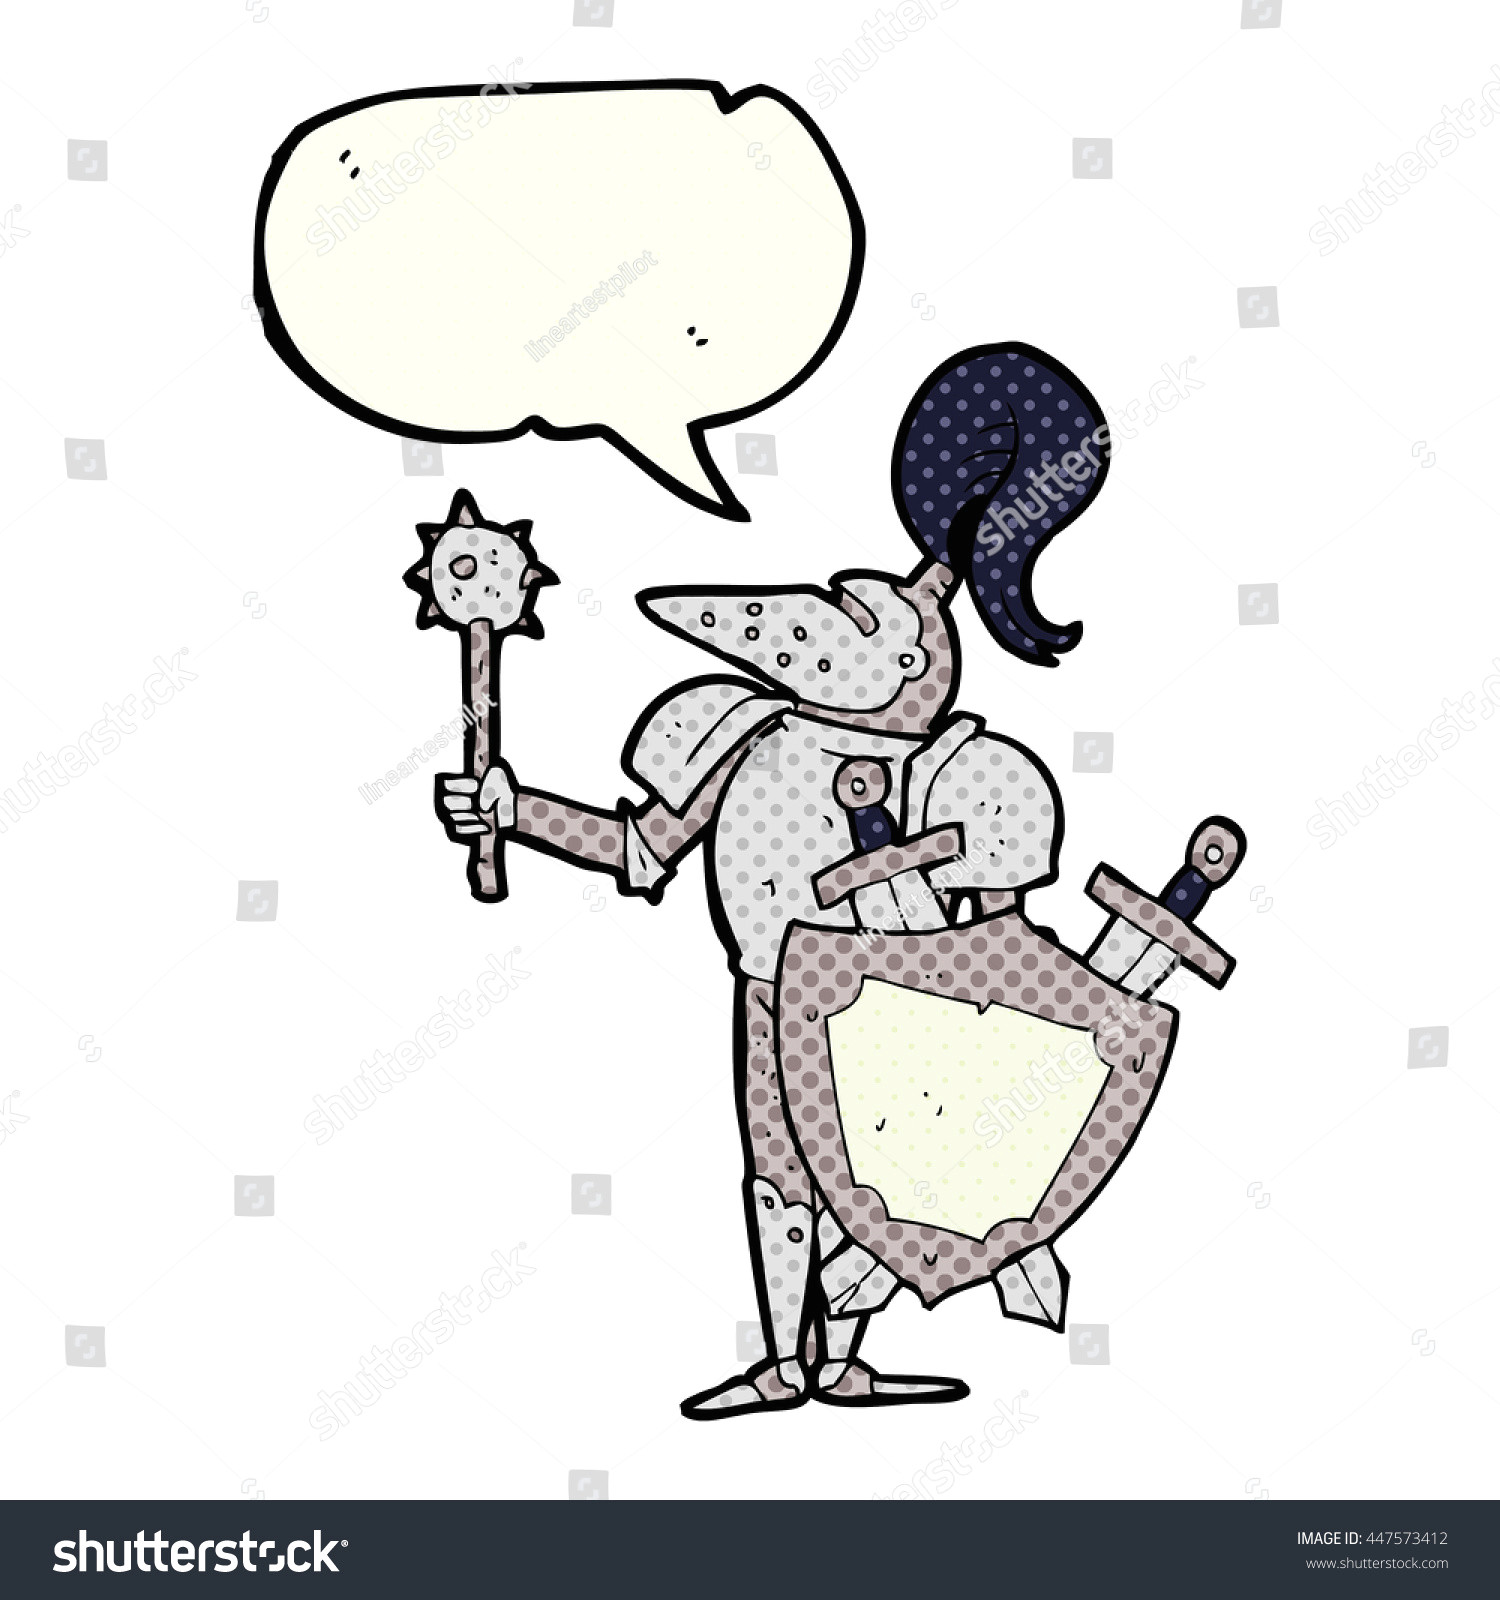 Drawing A Cartoon Knight Freehand Drawn Comic Book Speech Bubble Stock Vector Royalty Free